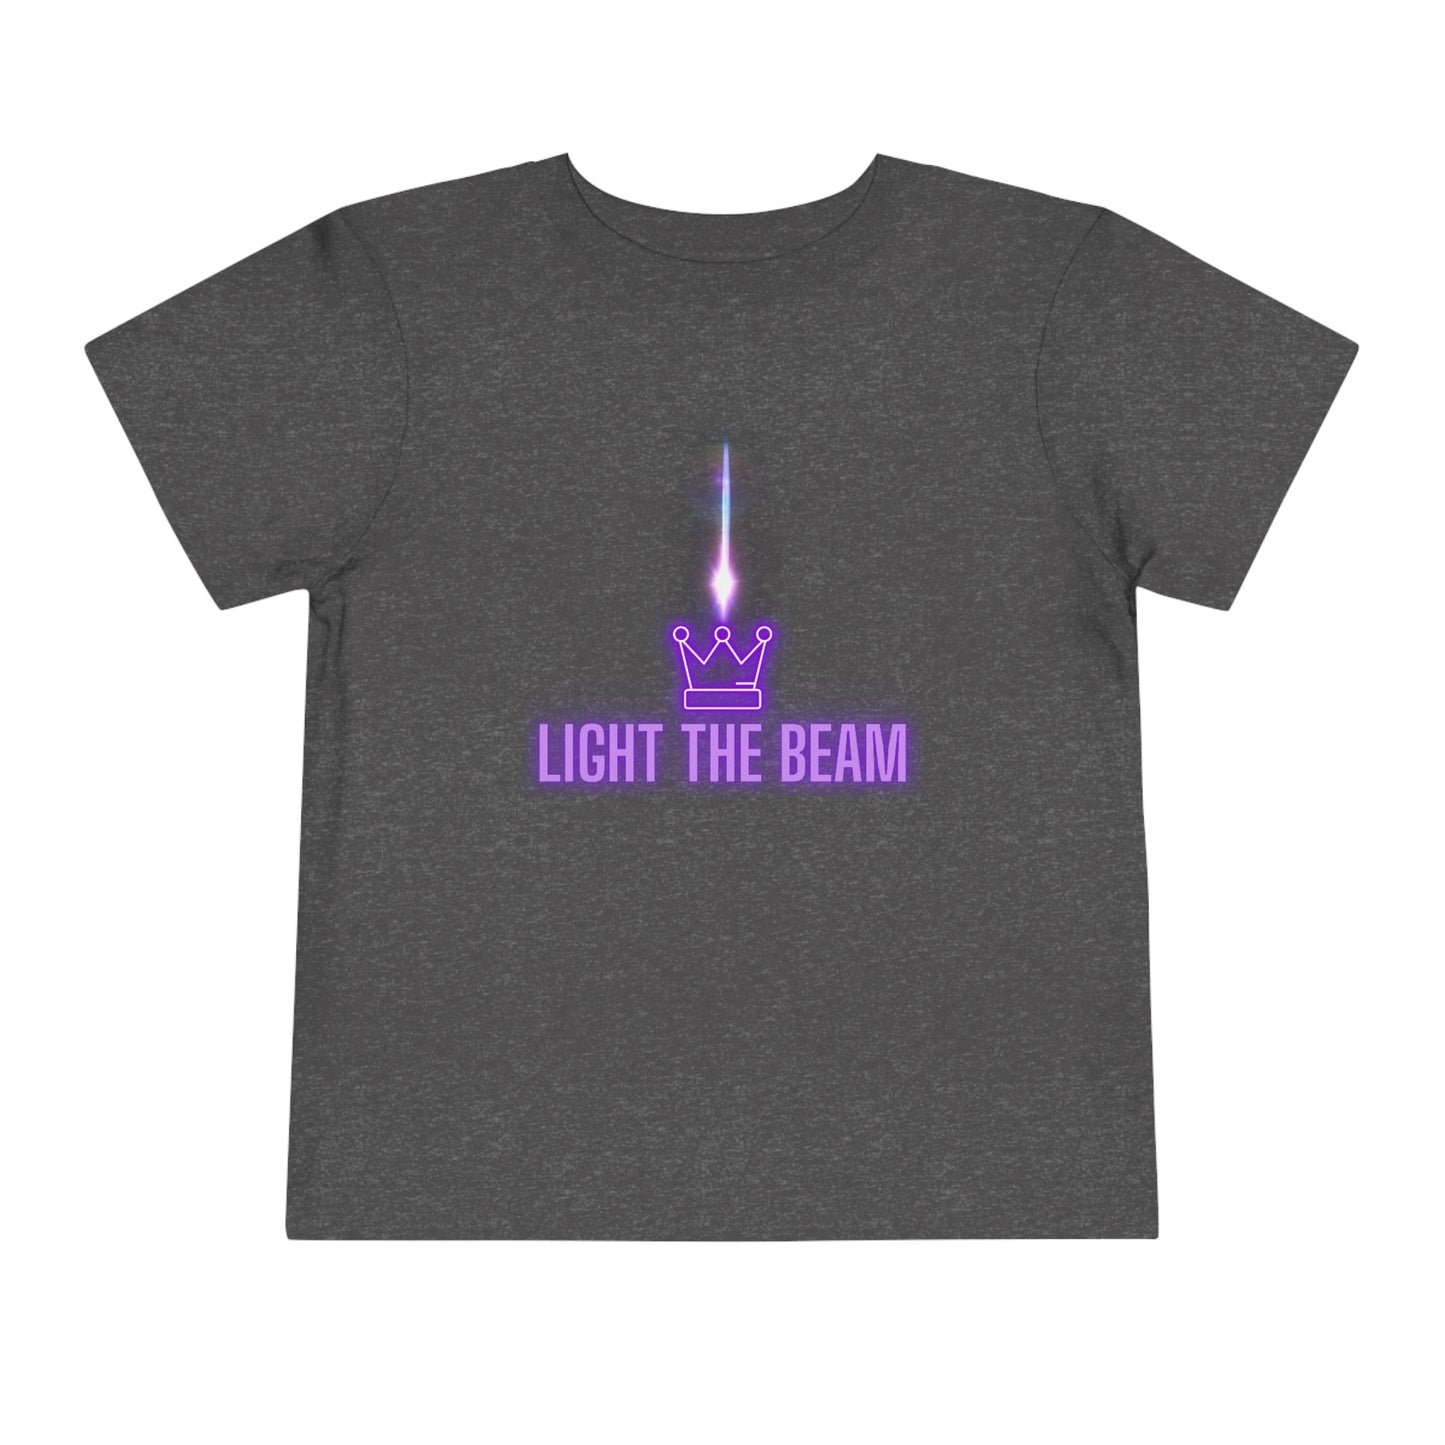 Light the Beam Kings Basketball, Toddler T-Shirt, Sacramento Basketball Shirt, Kings Fan Baby Tee Gift, Sacramento Gift for Toddler,Kids LOVE to Light the Beam! Celebrate another W - WIN - for your Kings Basketball team in this comfortable, cool toddler T-shirt. Perfect to wear at the game or on the playground the day after another W. Show off your Sac-Town pride!